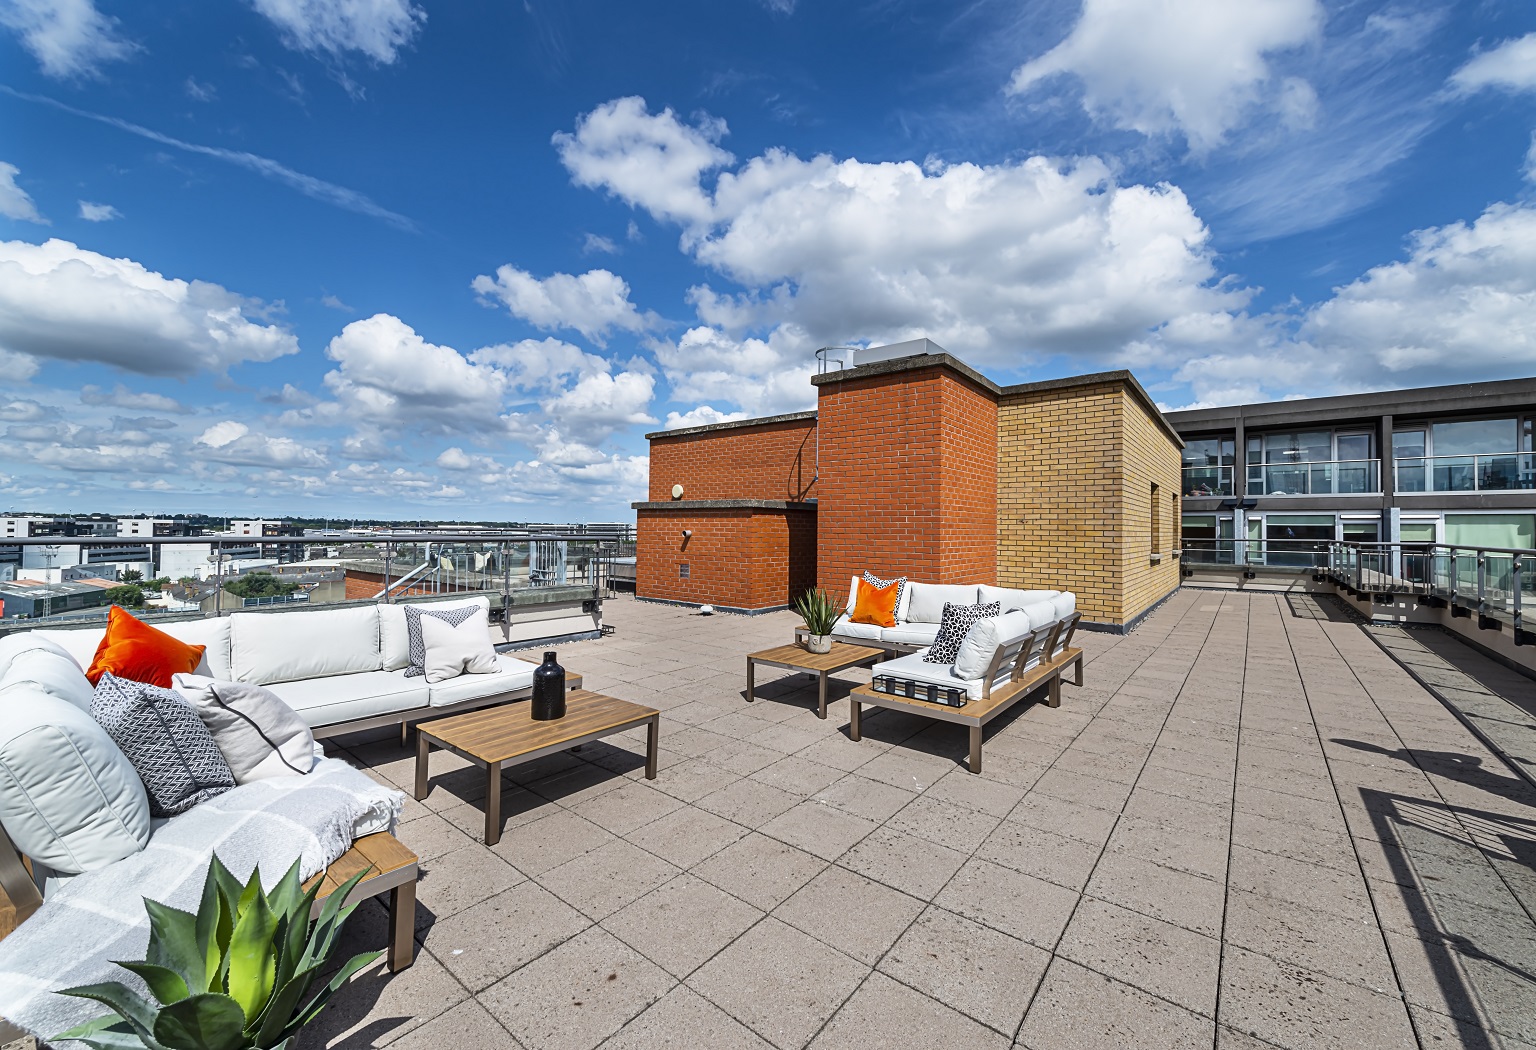 Unique Apartments For Sale Dublin Docklands for Small Space